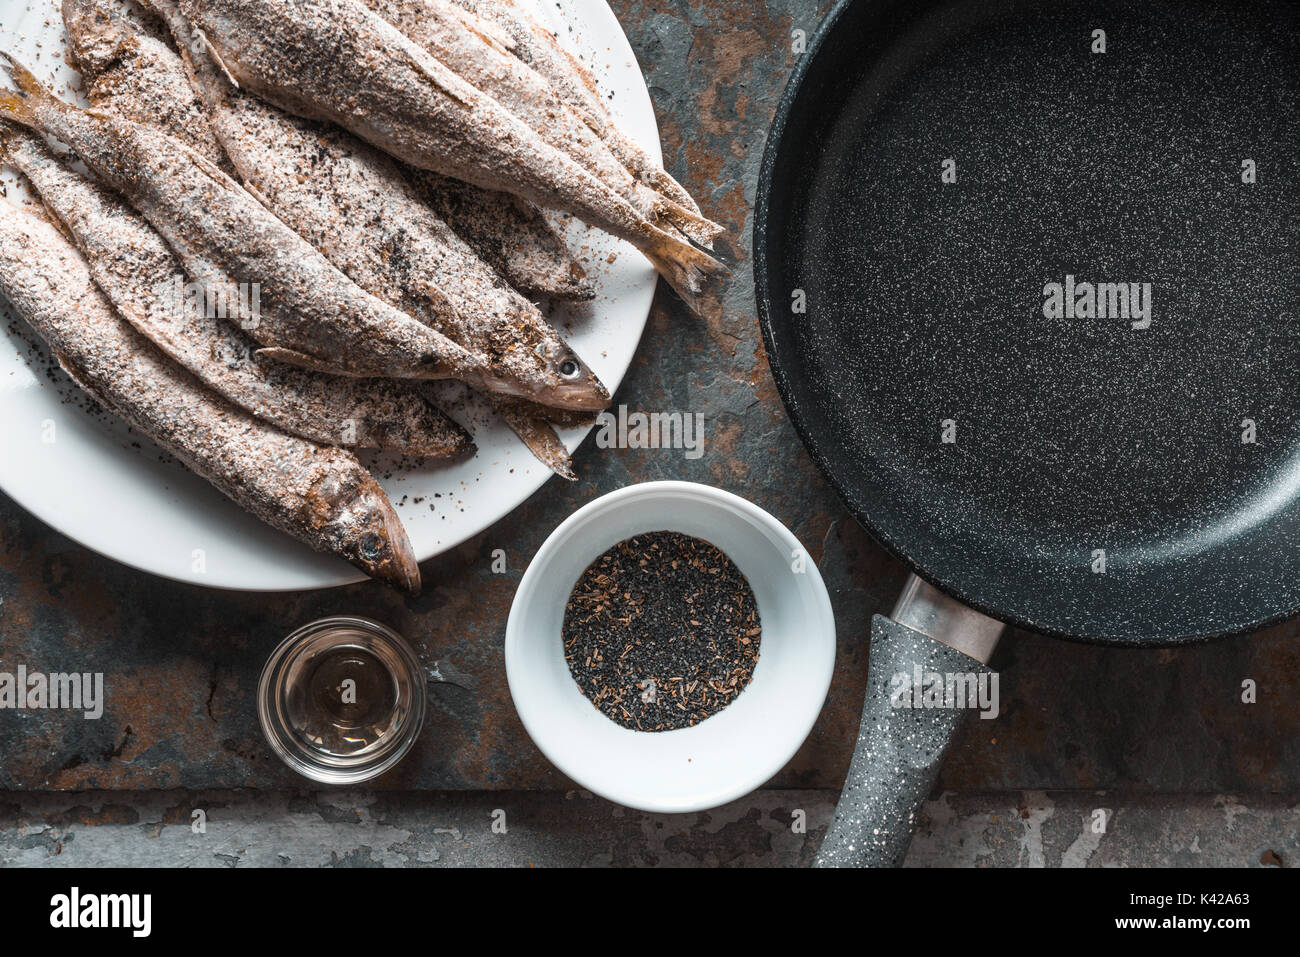 Smelt on a plate, frying pan, salt and spices horizontal Stock Photo